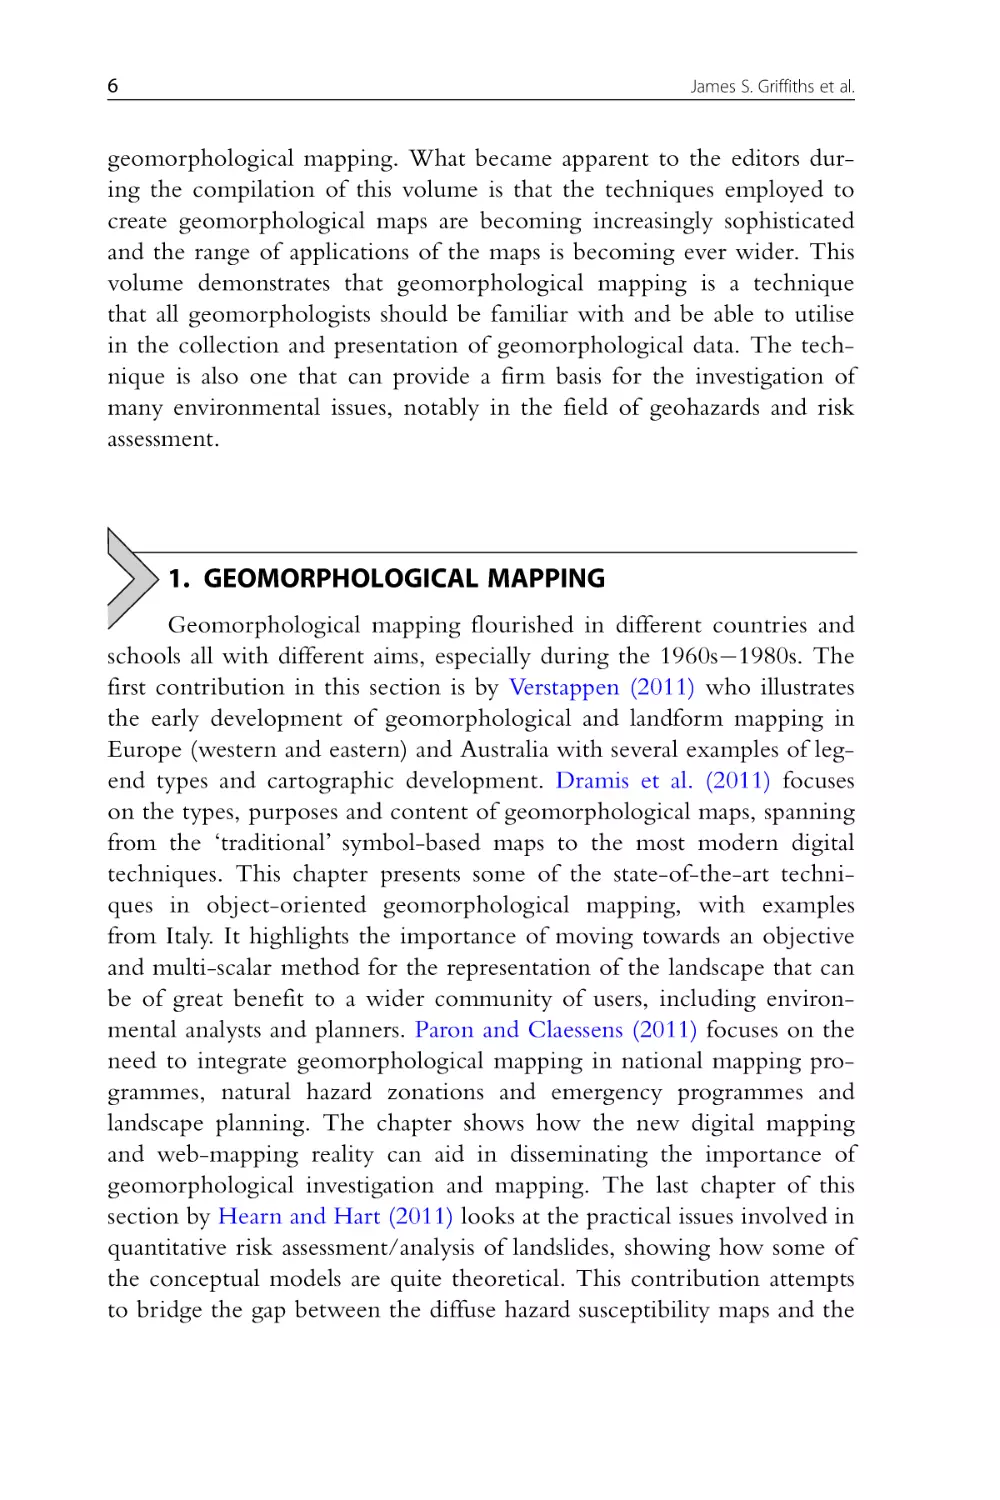 1. Geomorphological Mapping